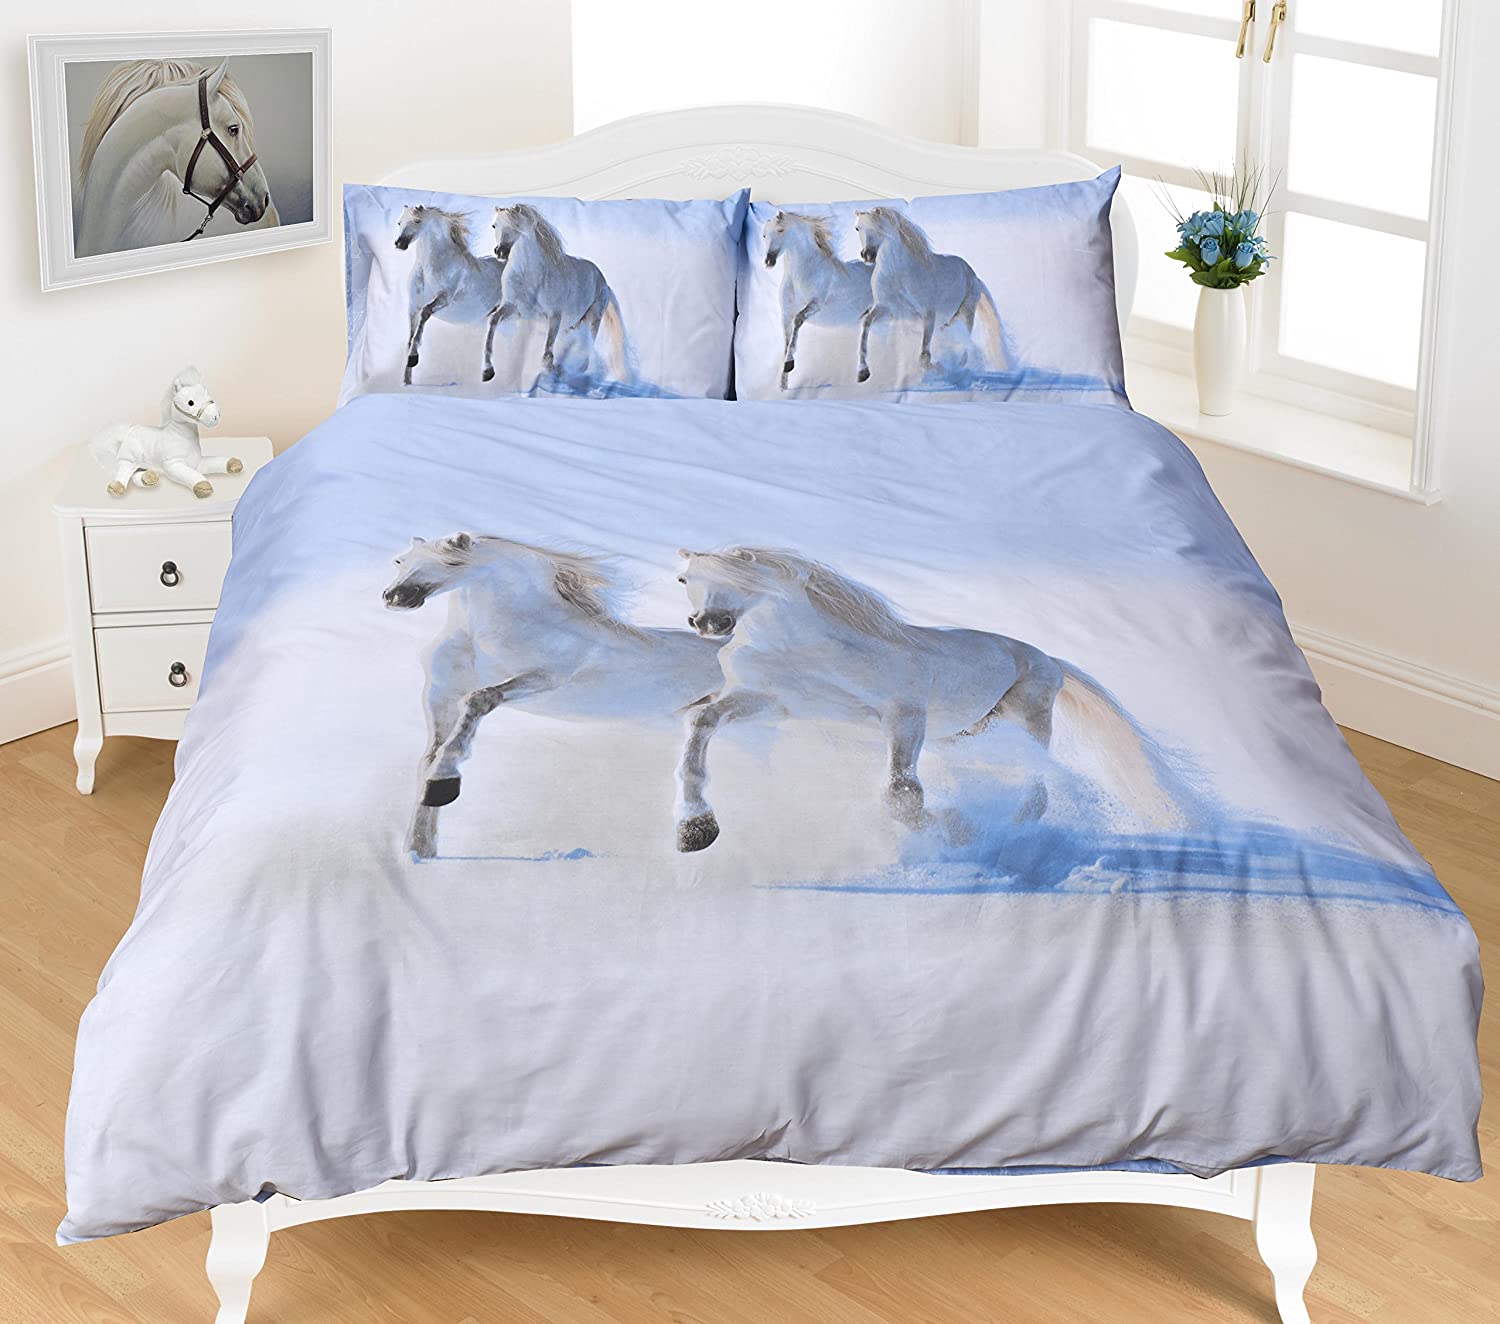 3D Horse Grey Duvet Cover Sets - Polycotton Fabric printed duvet covers with Pillowcases - All UK Sizes